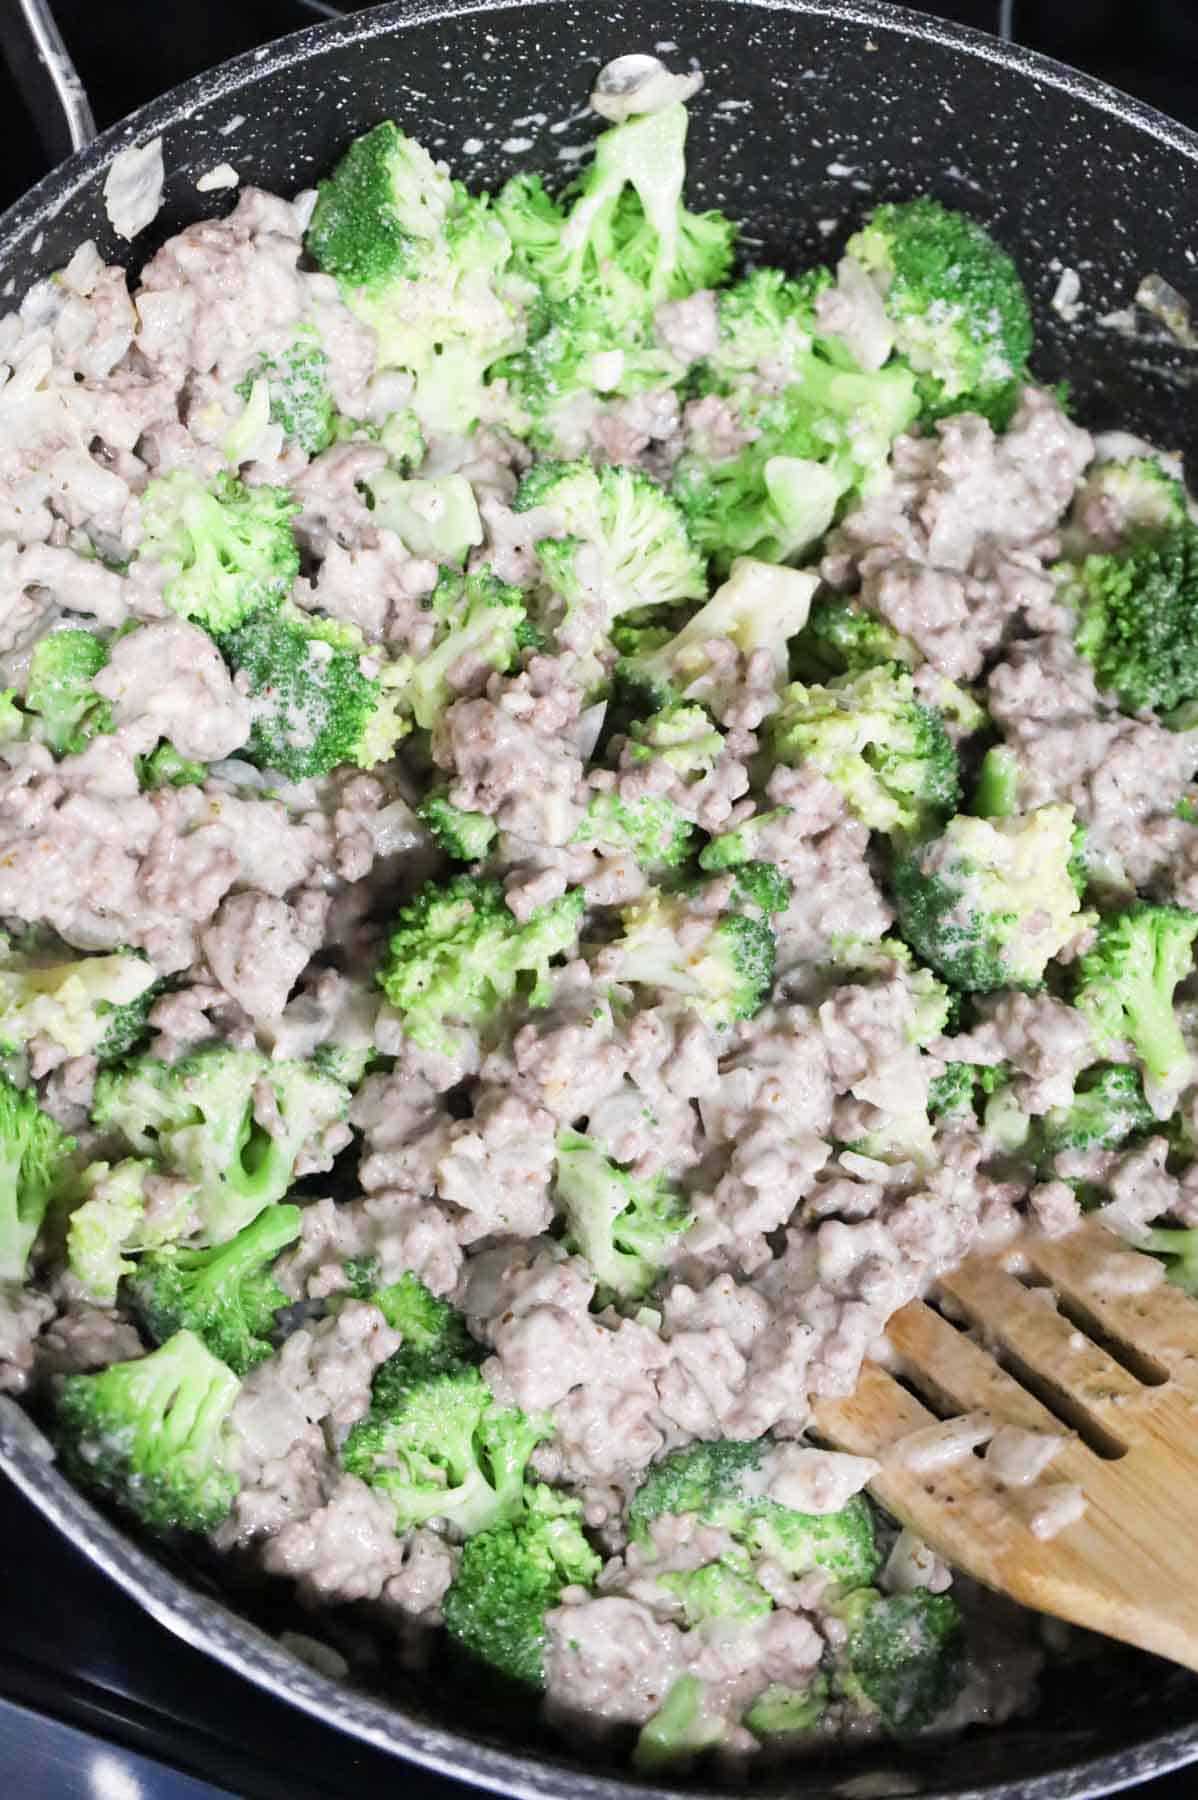 broccoli florets being stirred into ground beef and alfredo sauce mixture in a skillet